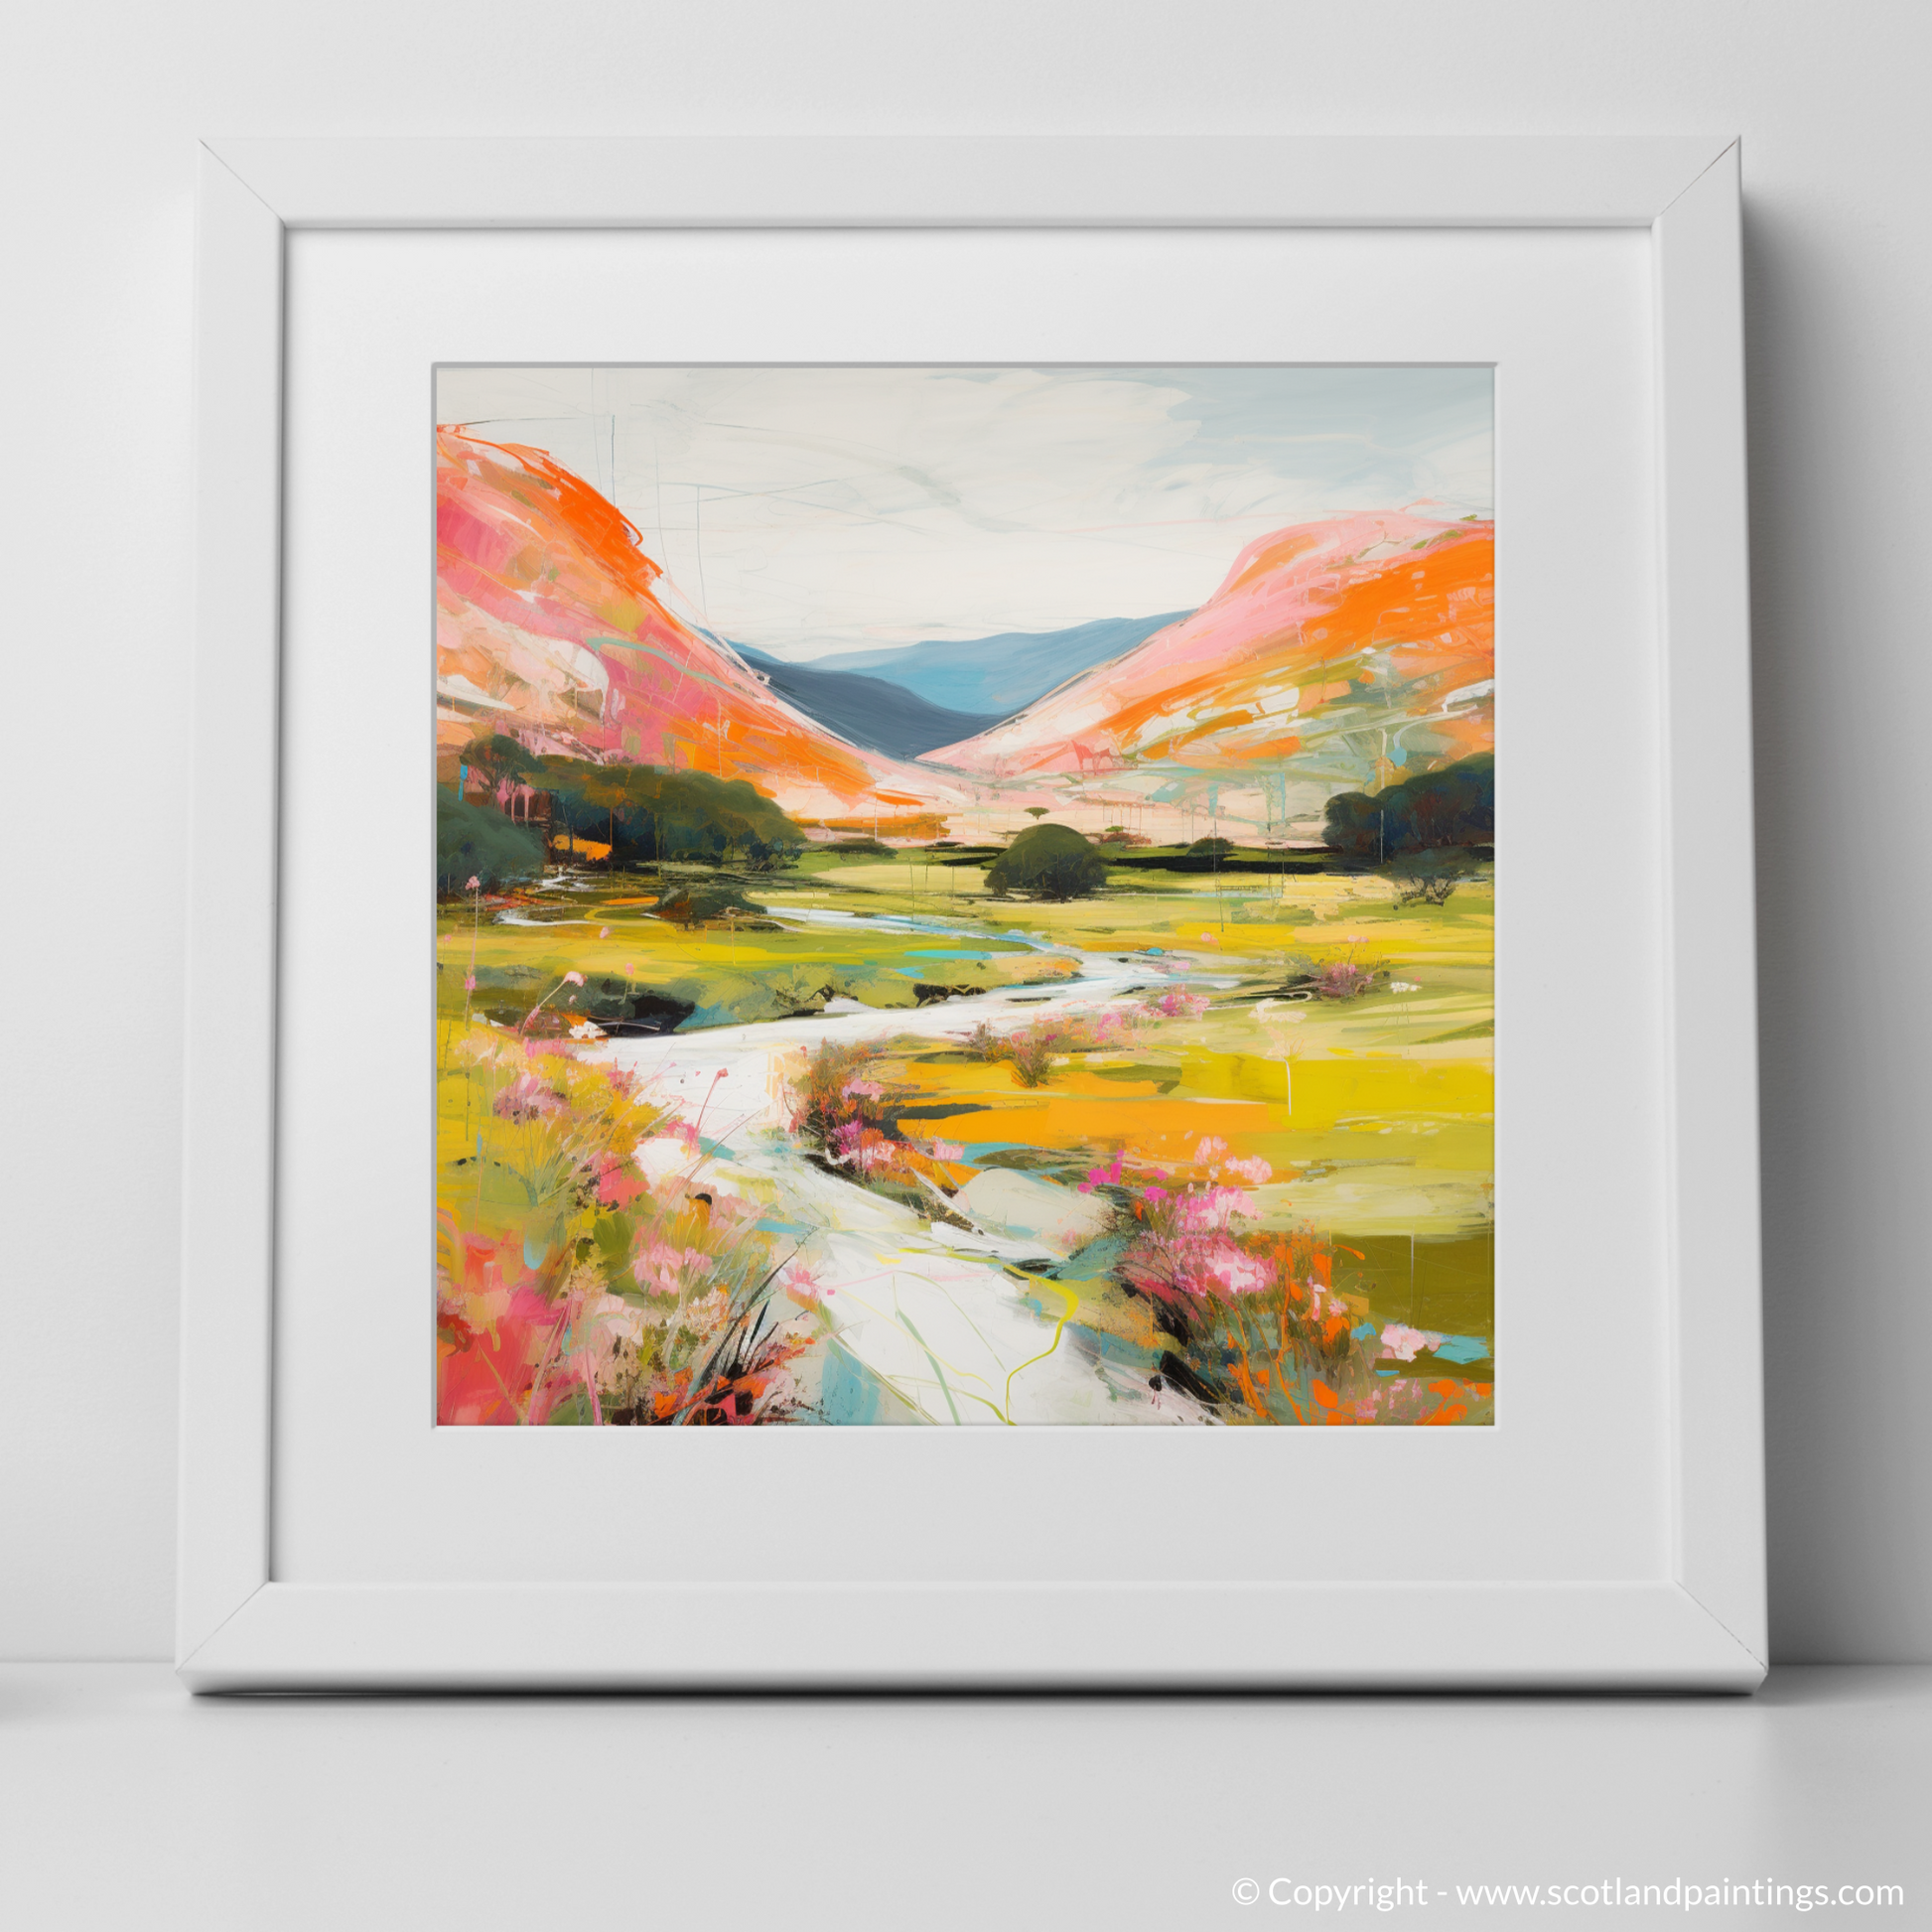 Art Print of Glen Roy, Highlands in summer with a white frame